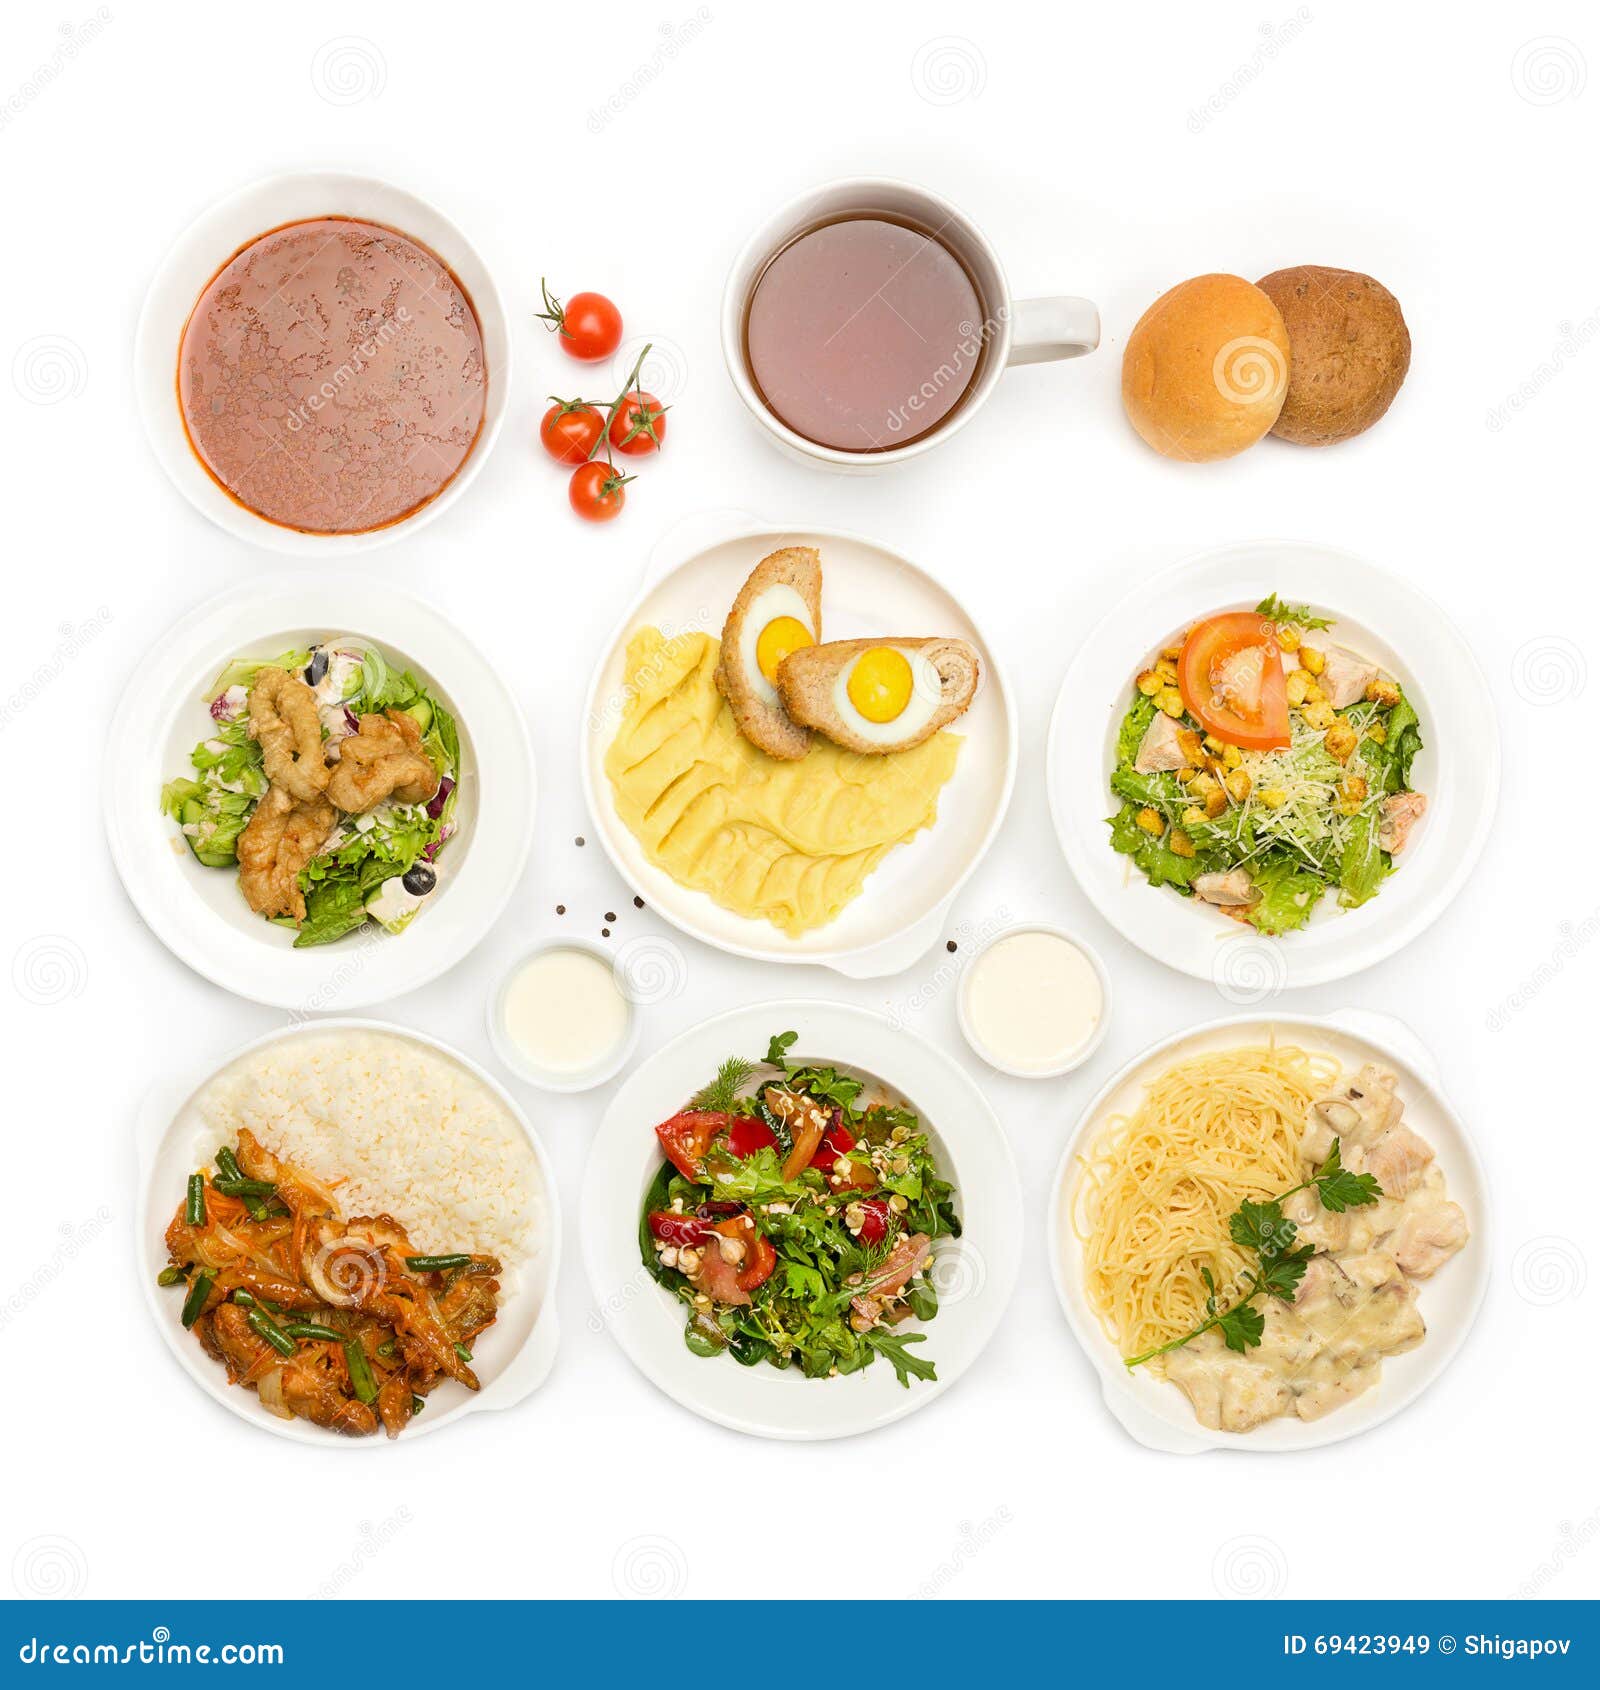 top view of many plates with food